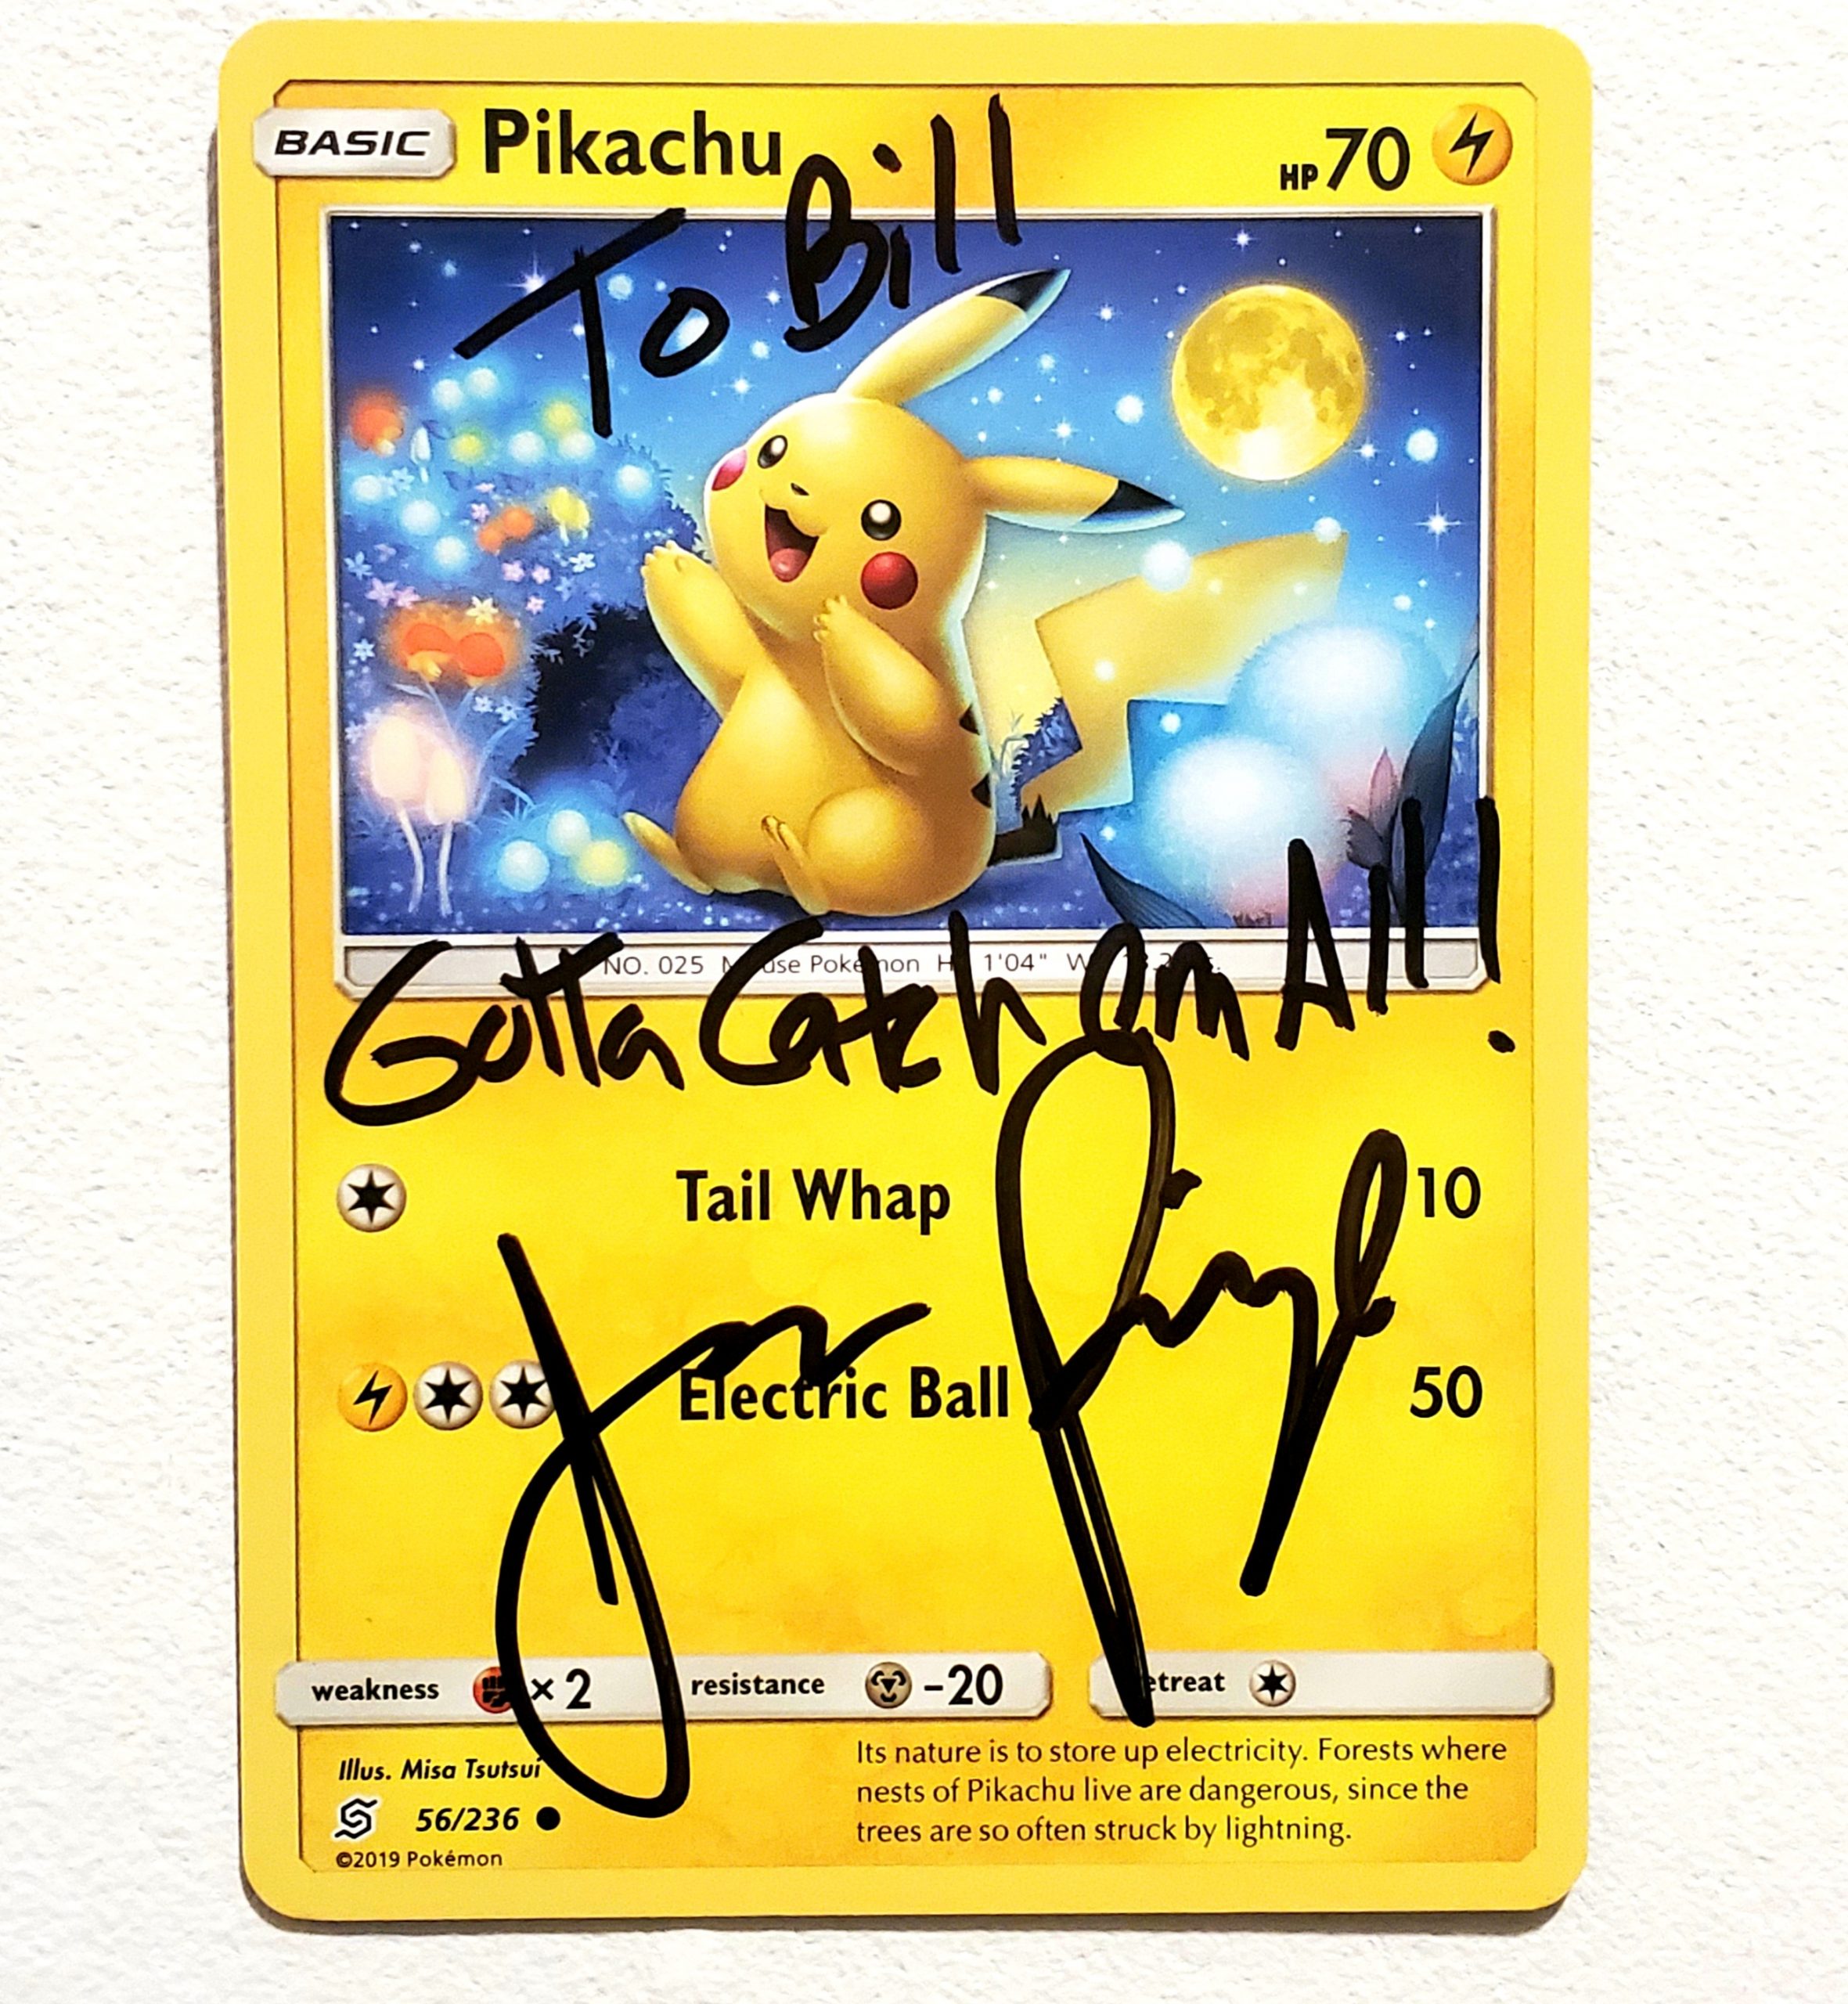 Autographed Pikachu Card 4 Limited Supply.